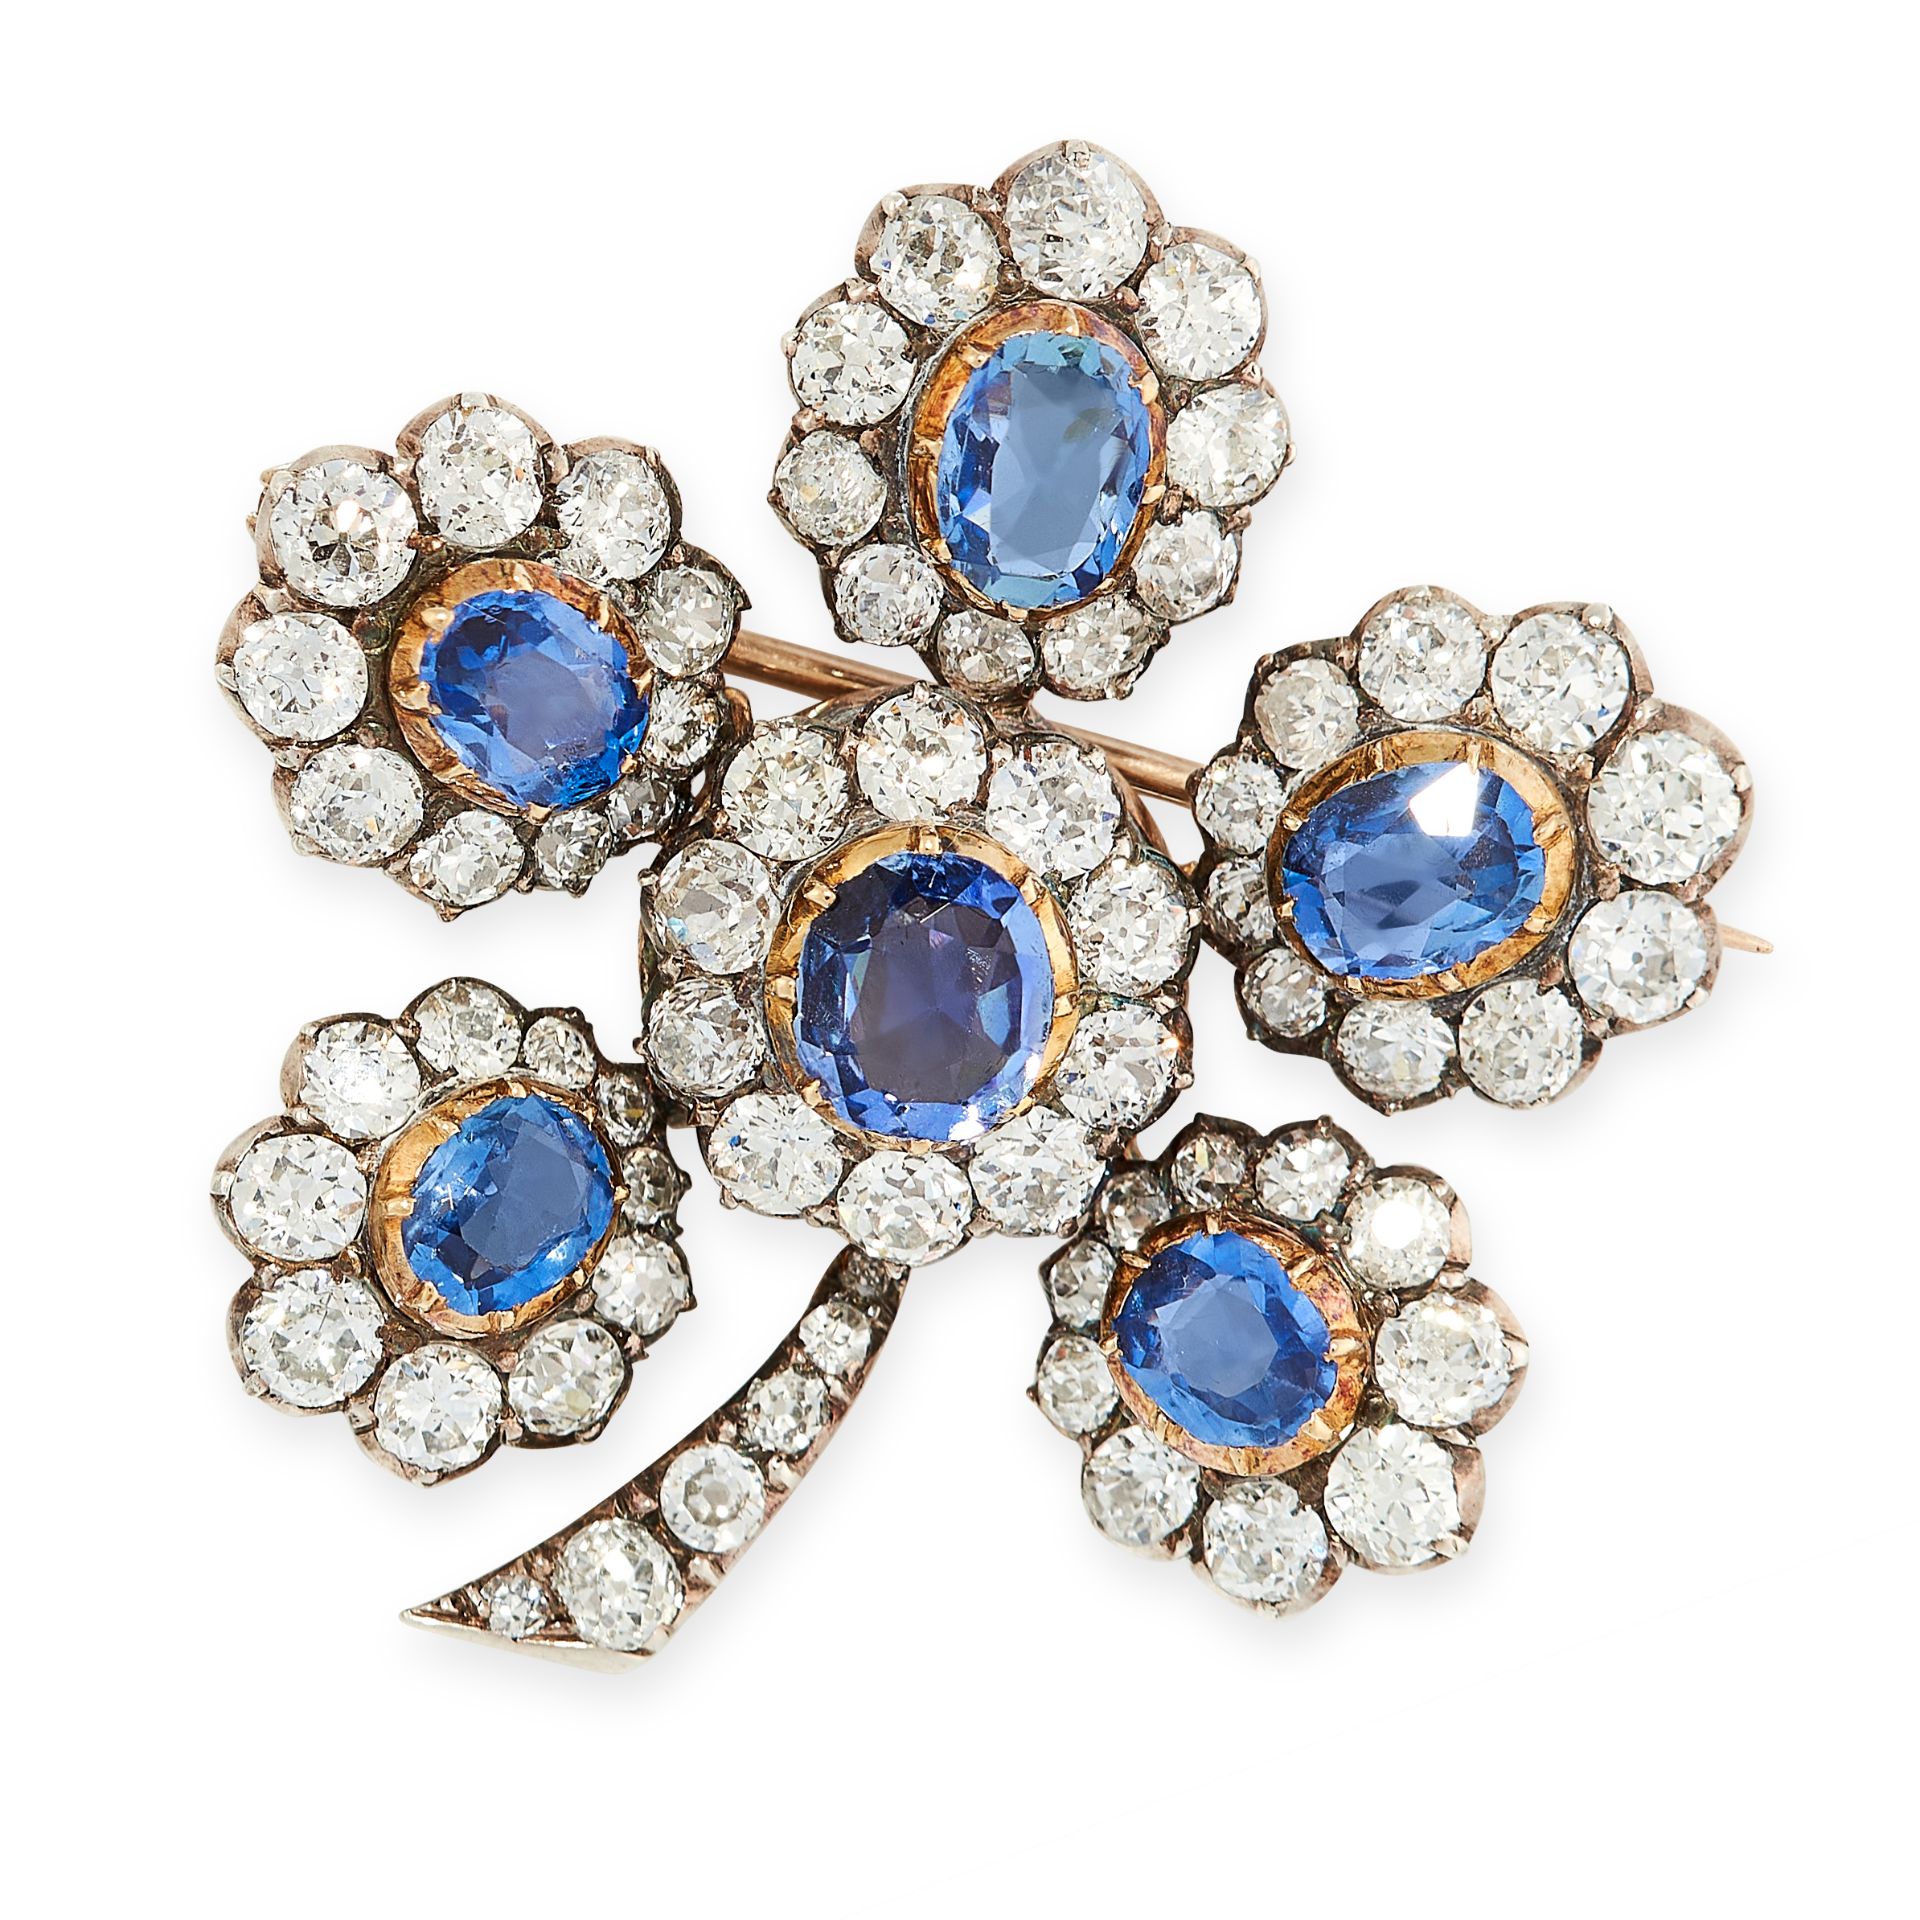 AN ANTIQUE SAPPHIRE AND DIAMOND FLOWER BROOCH in yellow gold and silver, set with six oval cut